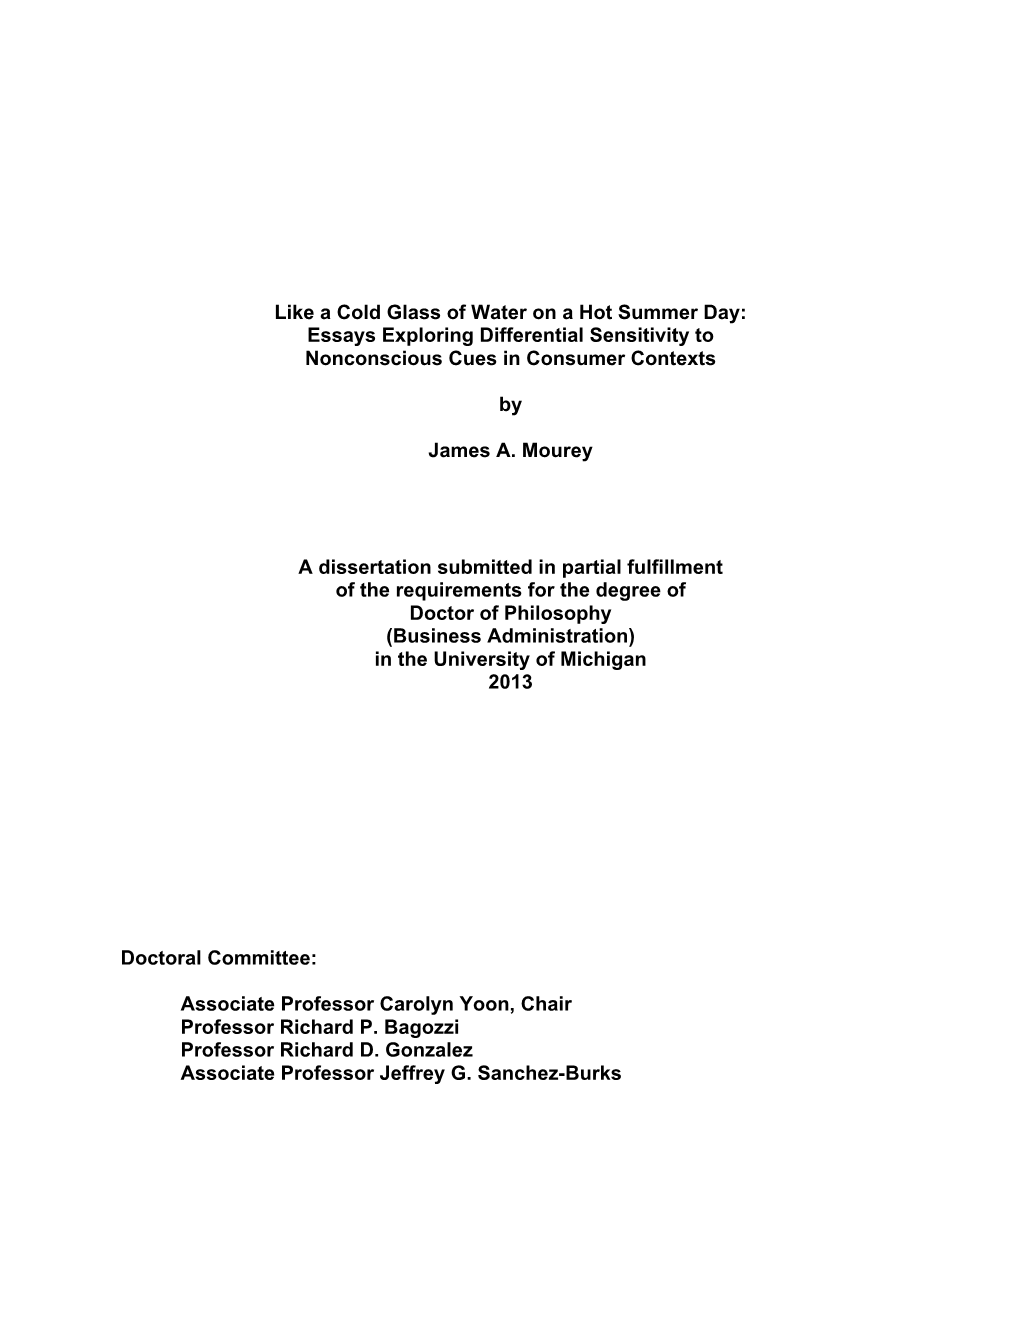 Dissertation Submitted in Partial Fulfillment of the Requirements for the Degree of Doctor of Philosophy (Business Administration) in the University of Michigan 2013